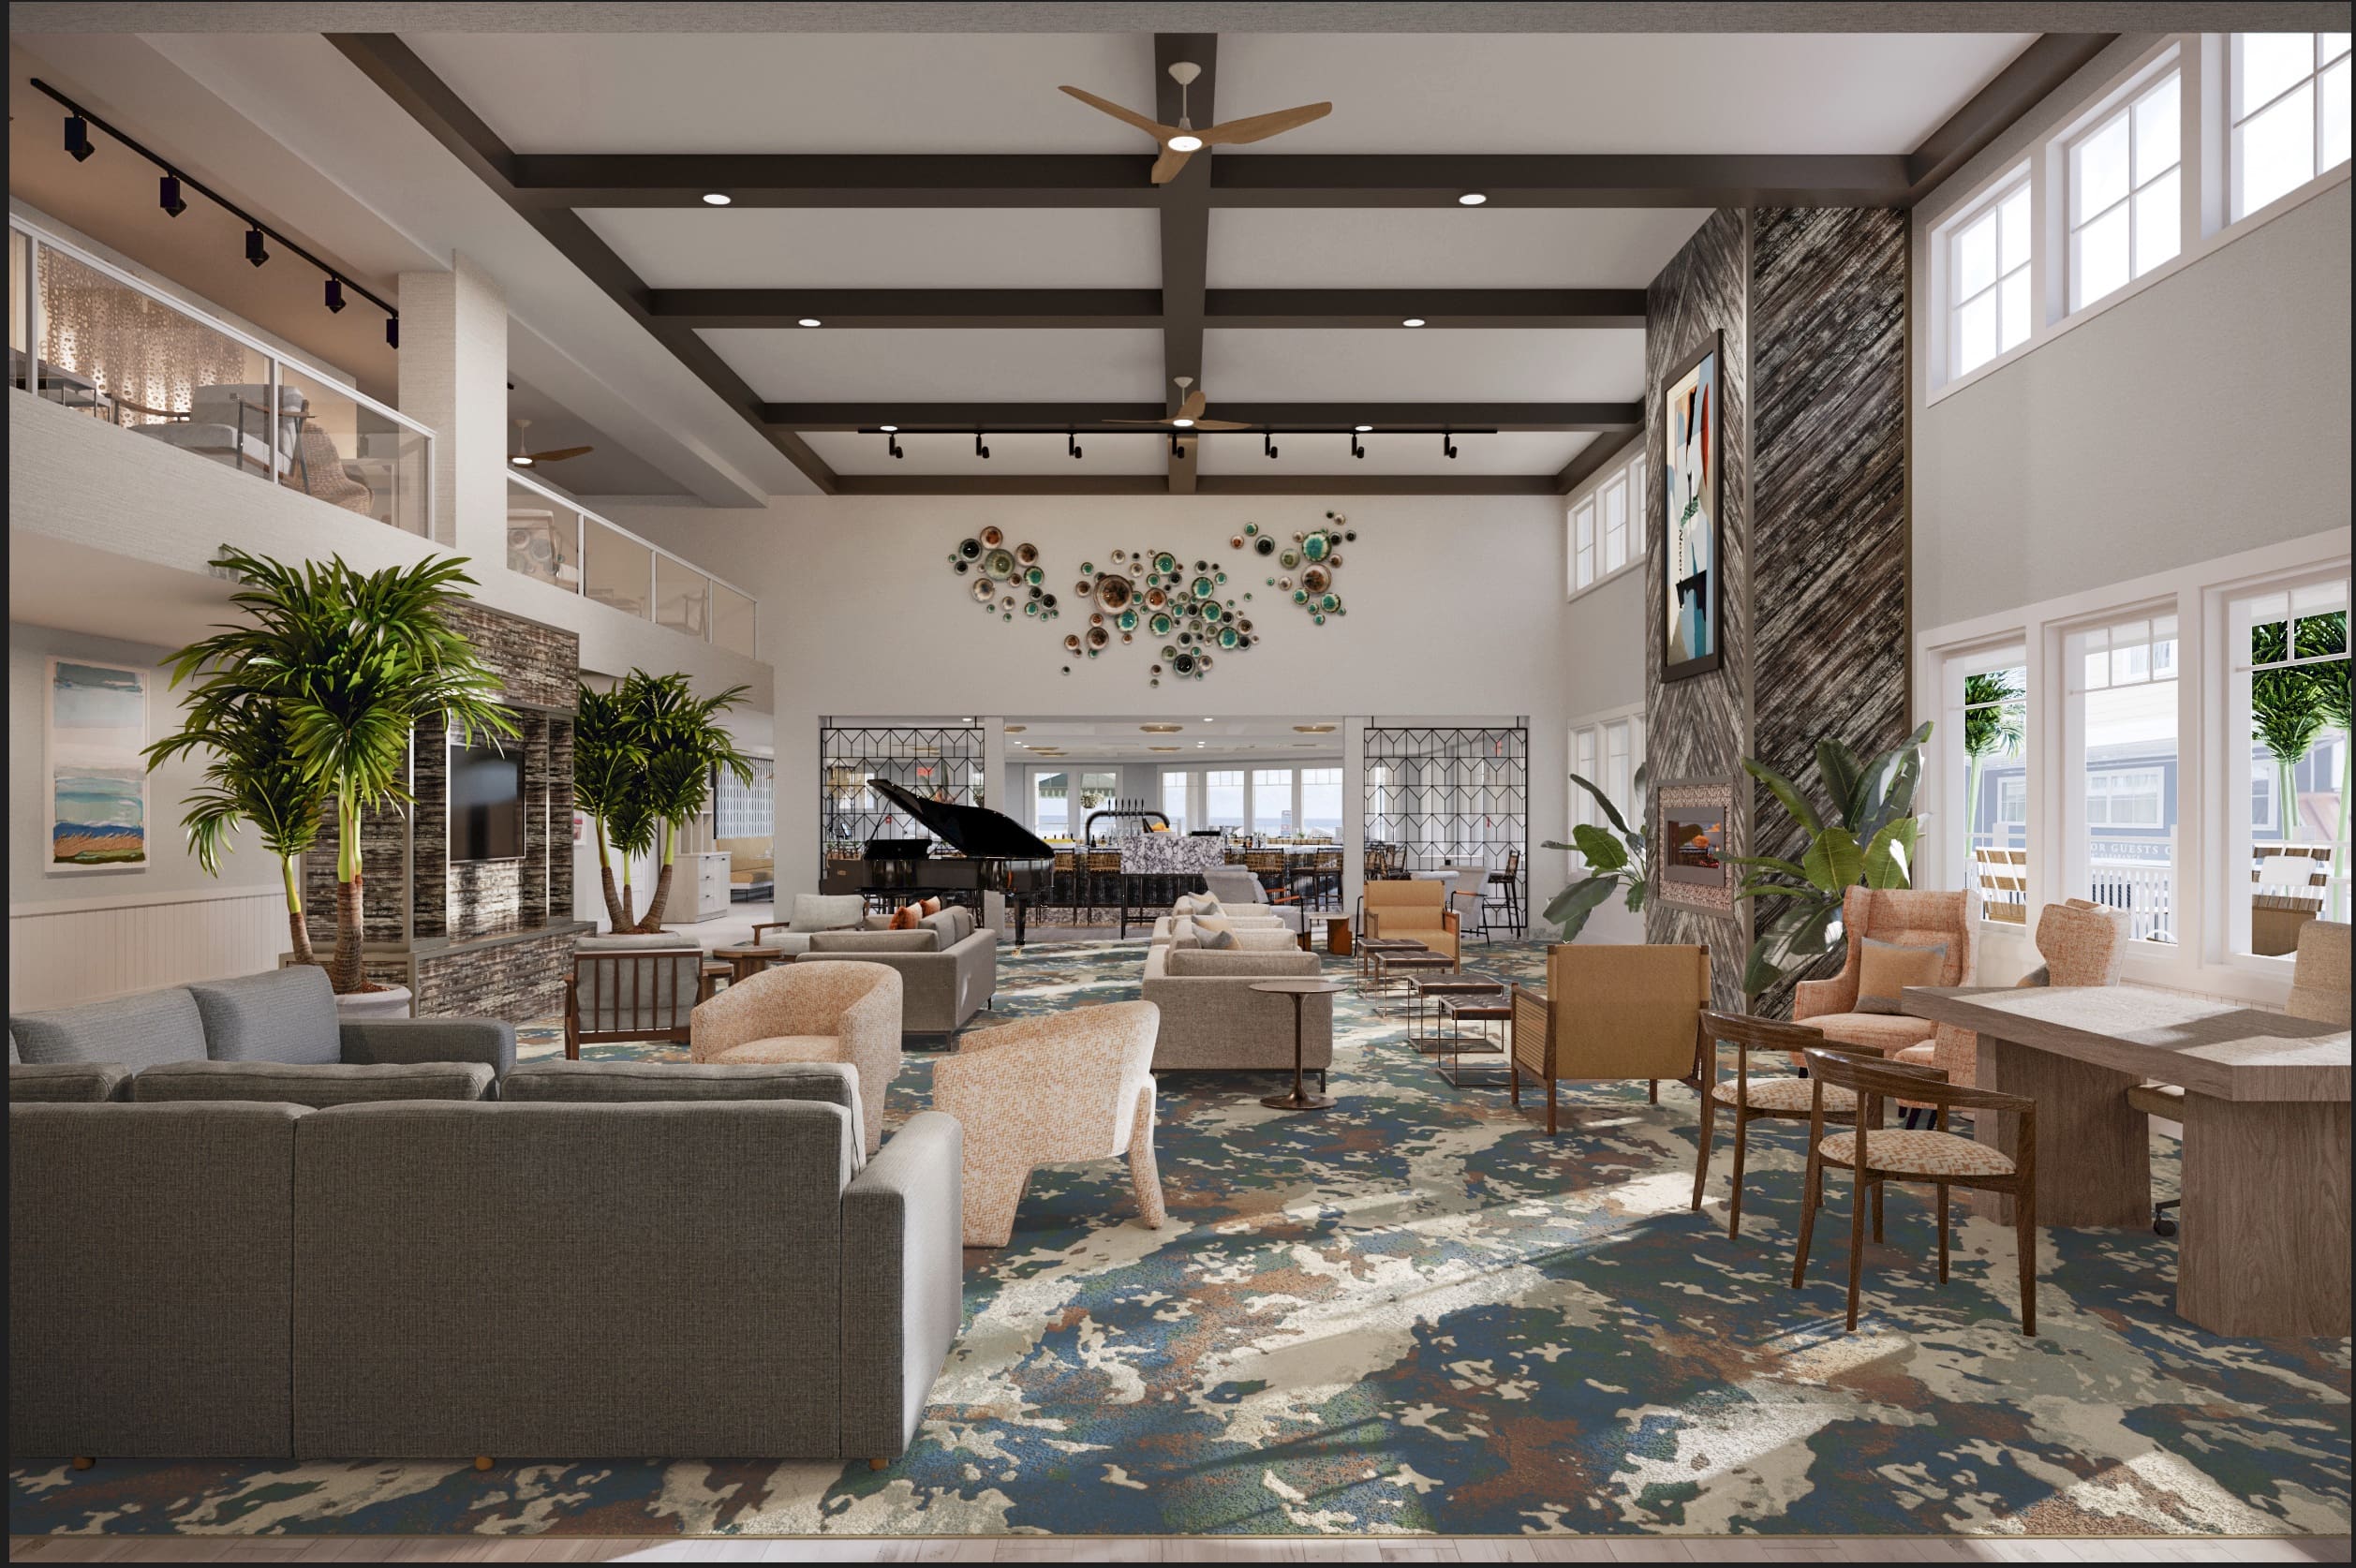 Featured image for “Bethany Beach Marriott makeover includes new restaurant”